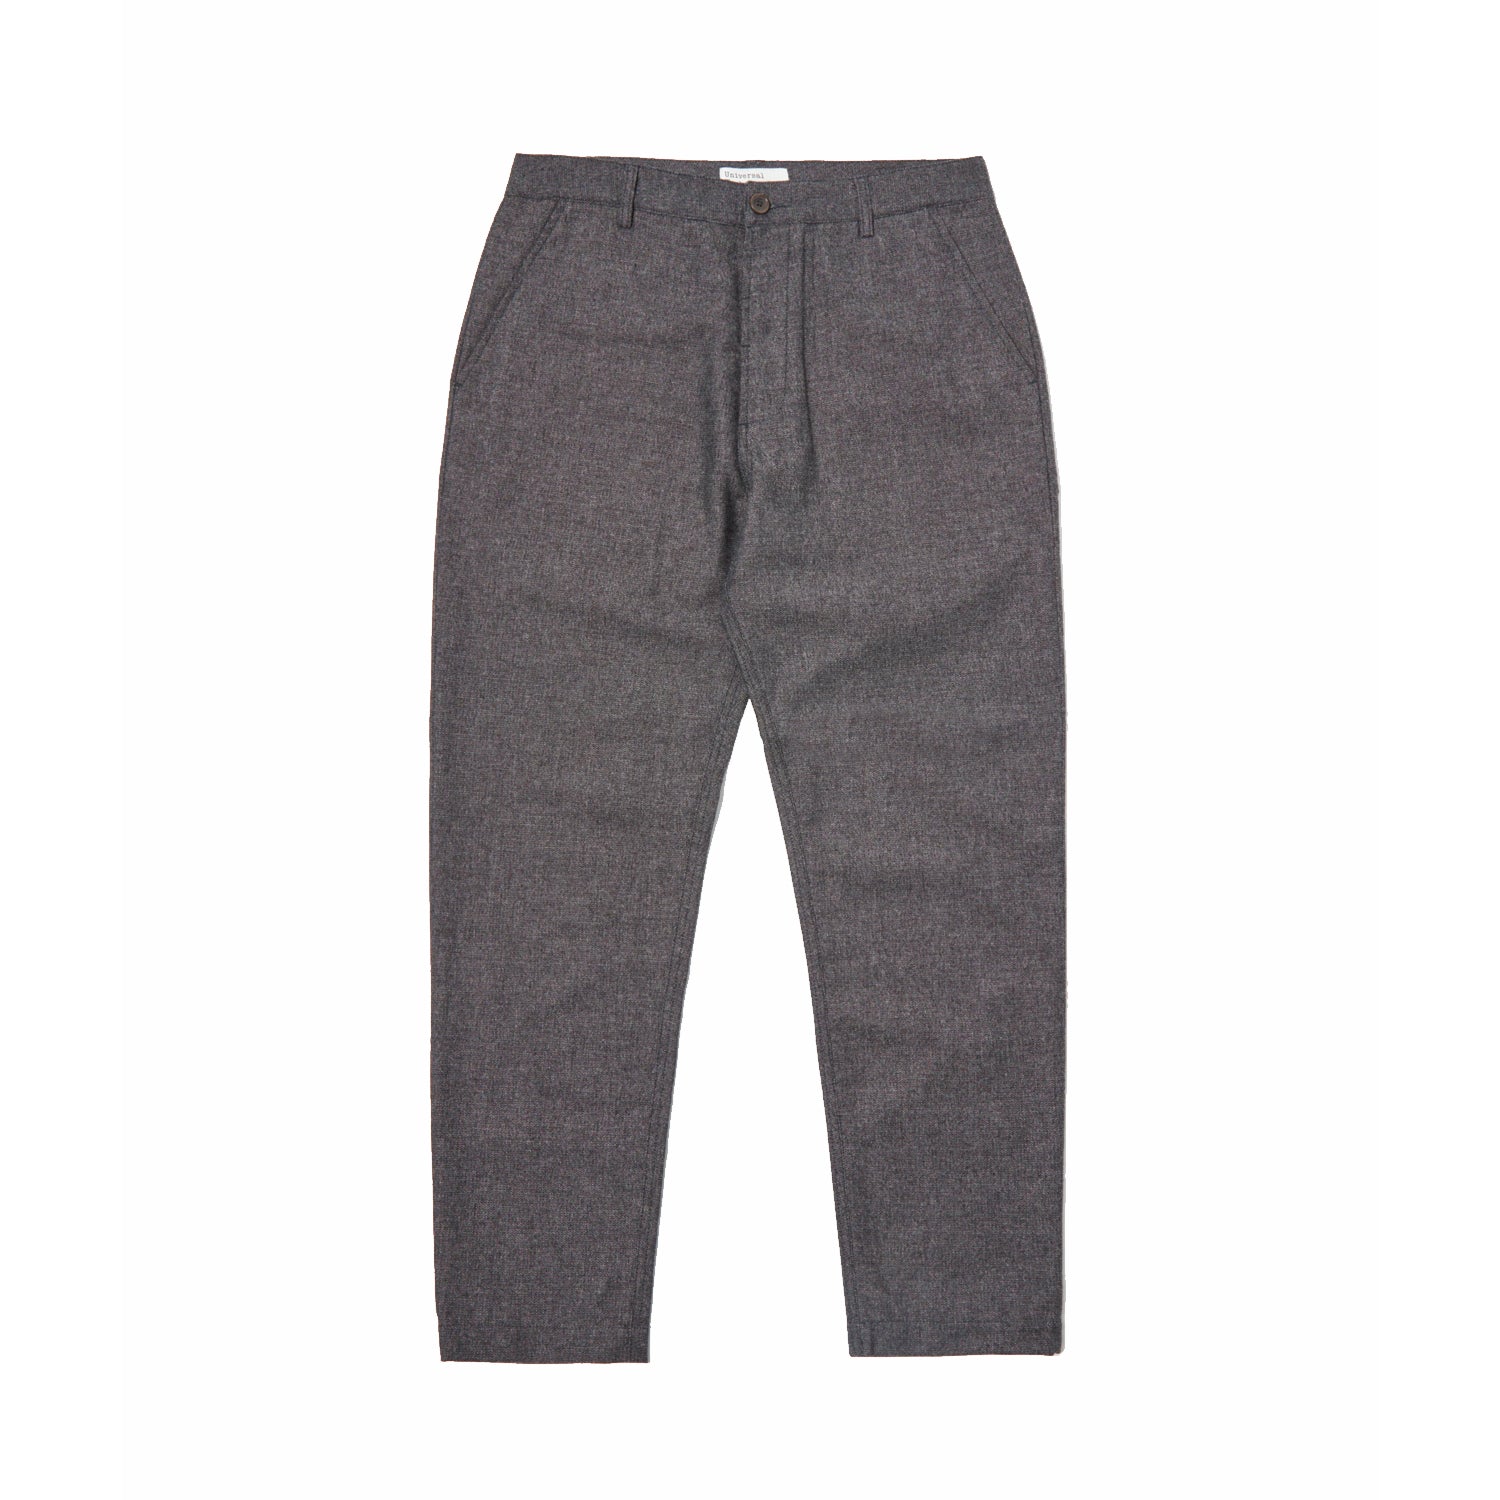 Game Excel Ripstop Trousers - lakelandcountry